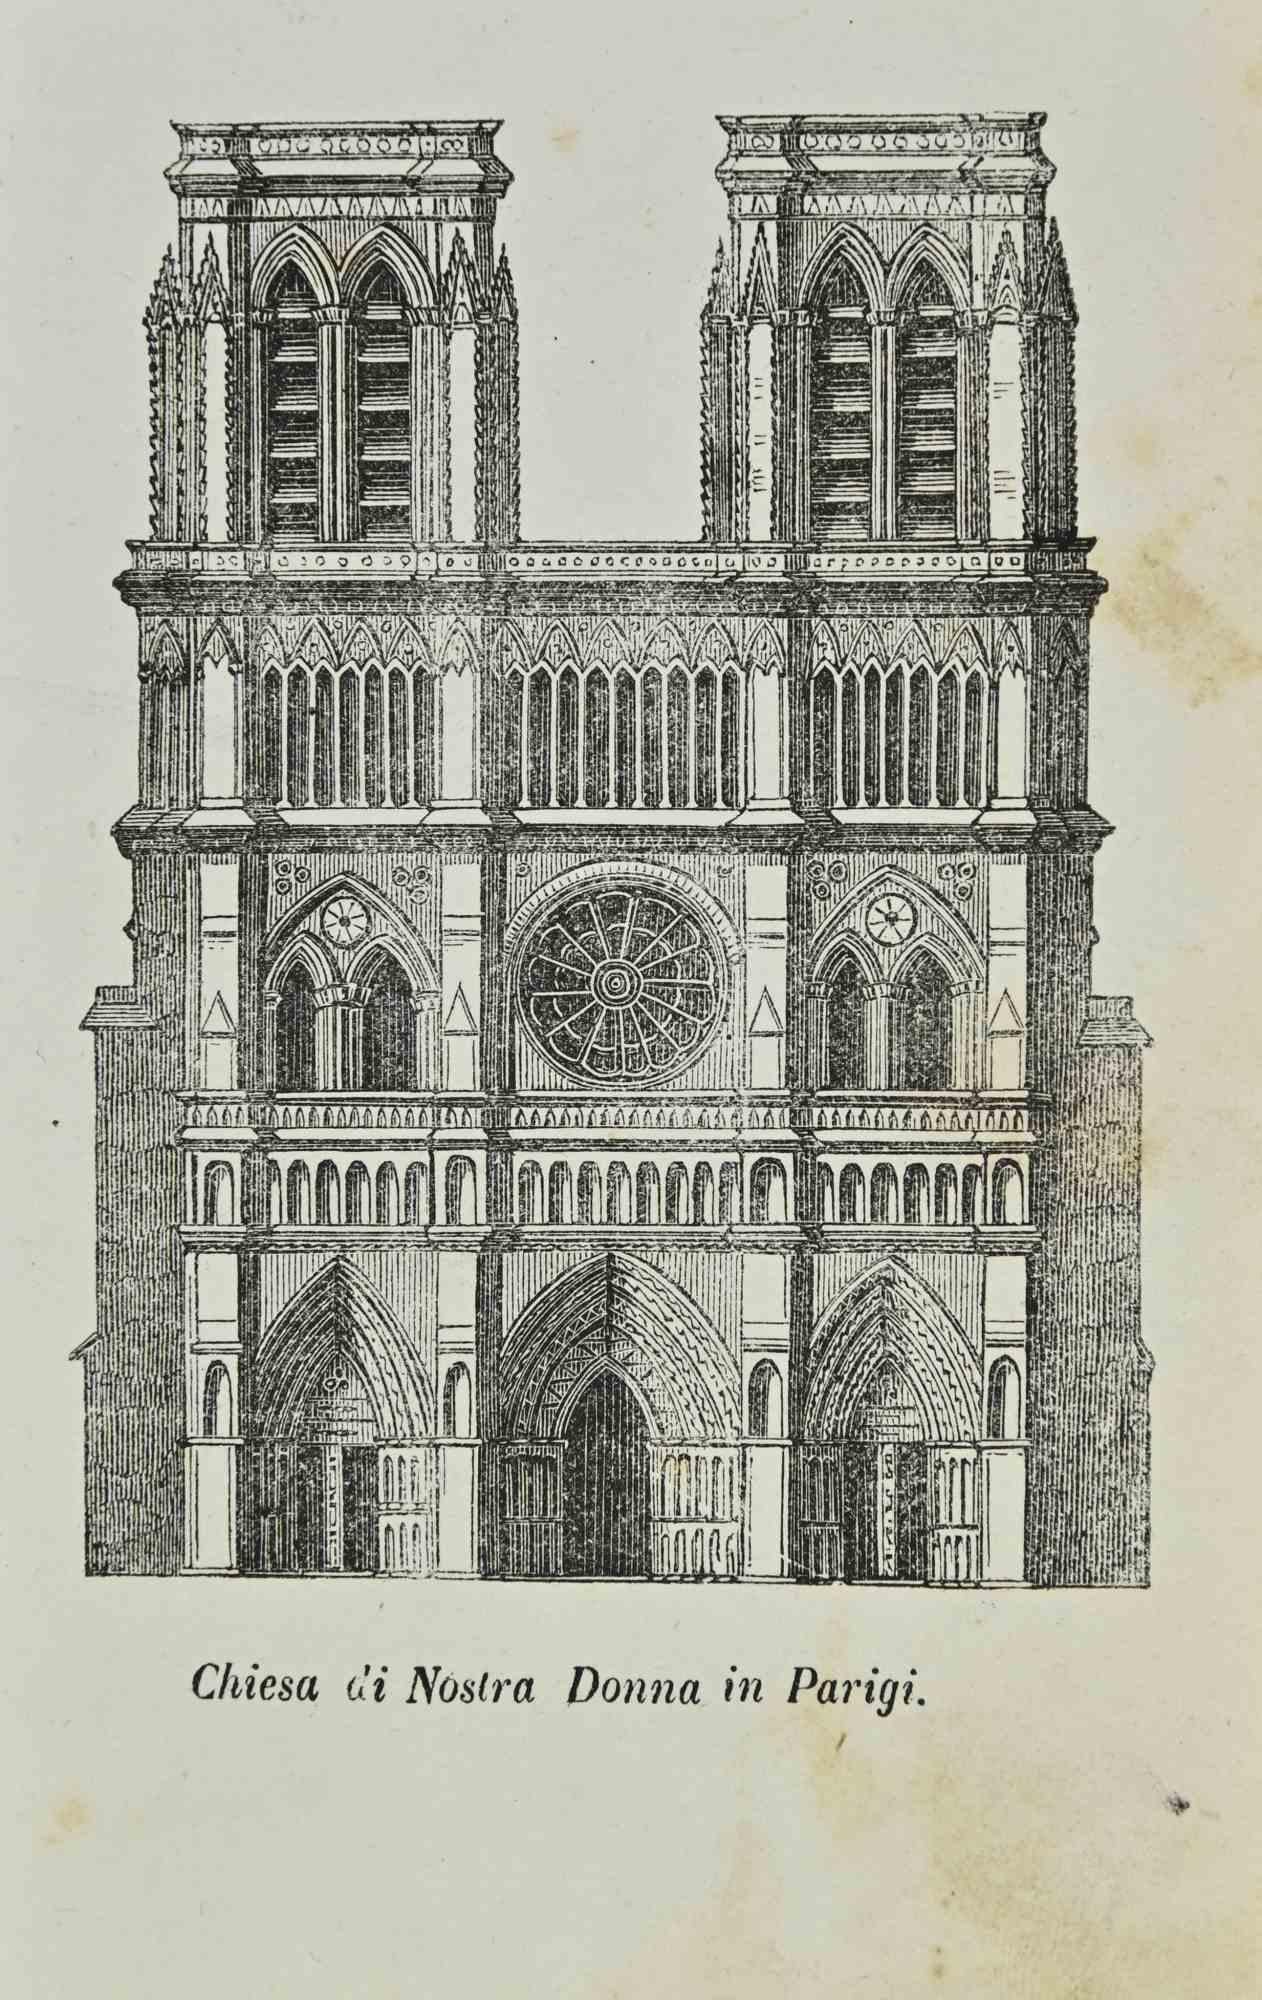 Church of Our Lady in Paris is a lithograph made by Auguste Wahlen in 1844.

Good condition.

Drawing in black and white.

At the center of the artwork is the original title "Chiesa di Nostra Donna in Parigi".

The work is part of Suite Moeurs,